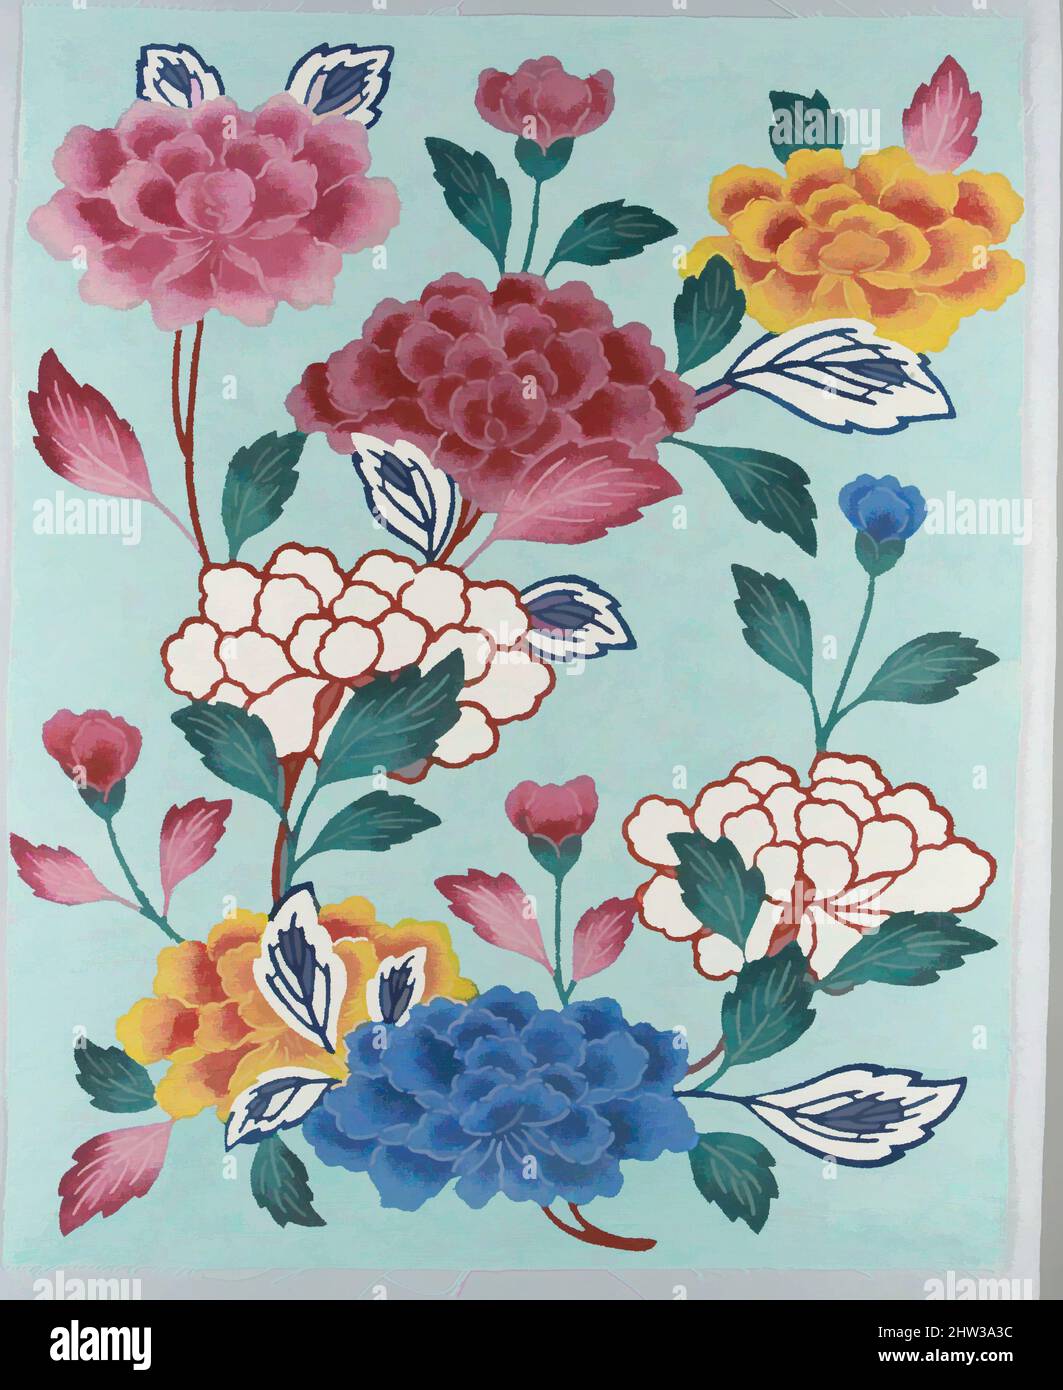 Art inspired by Bingata Panel with Tree Peonies, 20th century, Japan (Ryūkyū Islands), Cotton tabby, 18 1/2 x 15 in. (47 x 38.1 cm), Textiles, Mrs. Teruyo Shinohara and her pupils, Classic works modernized by Artotop with a splash of modernity. Shapes, color and value, eye-catching visual impact on art. Emotions through freedom of artworks in a contemporary way. A timeless message pursuing a wildly creative new direction. Artists turning to the digital medium and creating the Artotop NFT Stock Photo